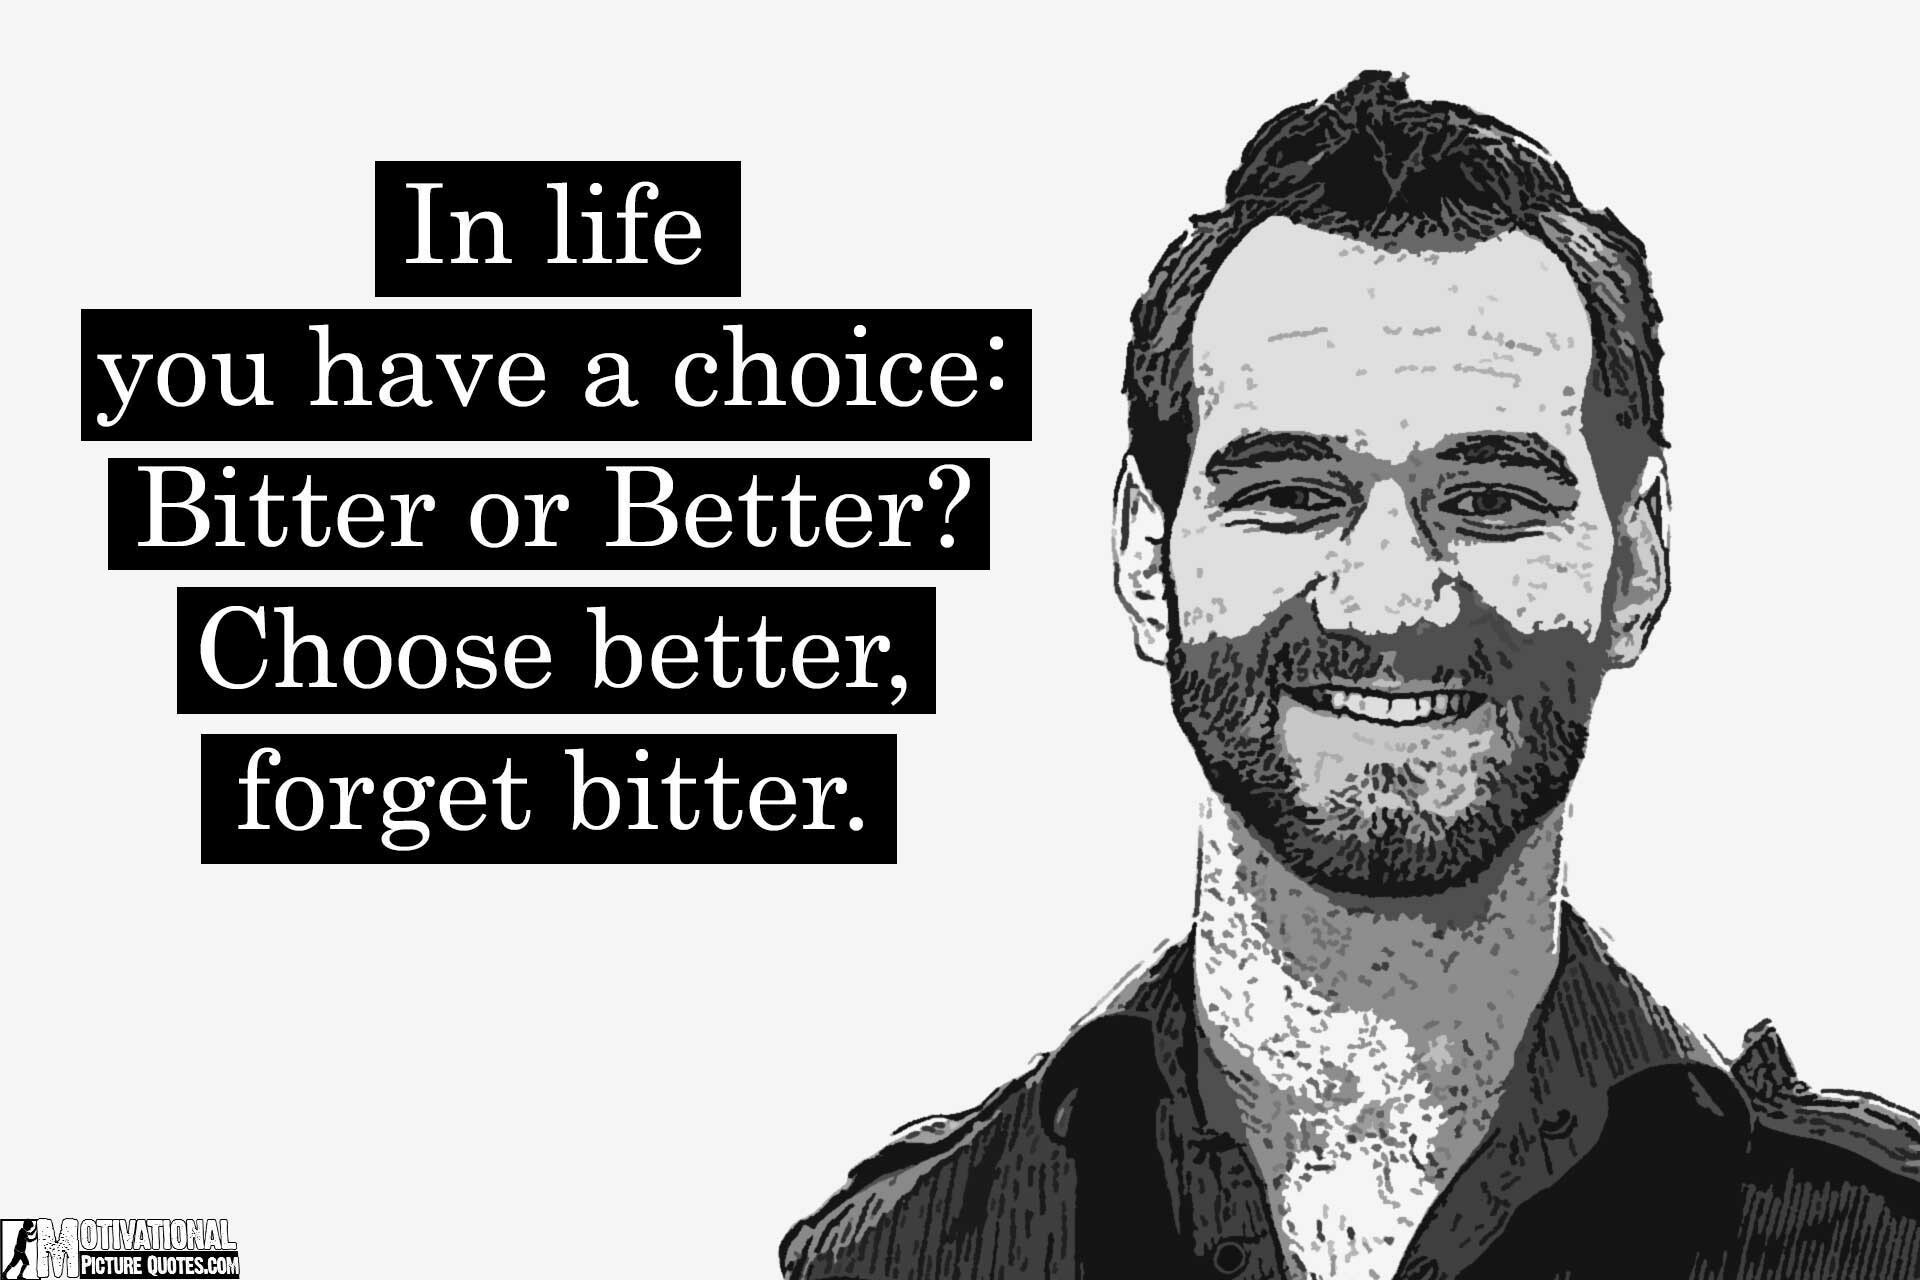 Nick Vujicic: Wrote a book, Life Without Limits: Inspiration for a Ridiculously Good Life. 1920x1280 HD Wallpaper.